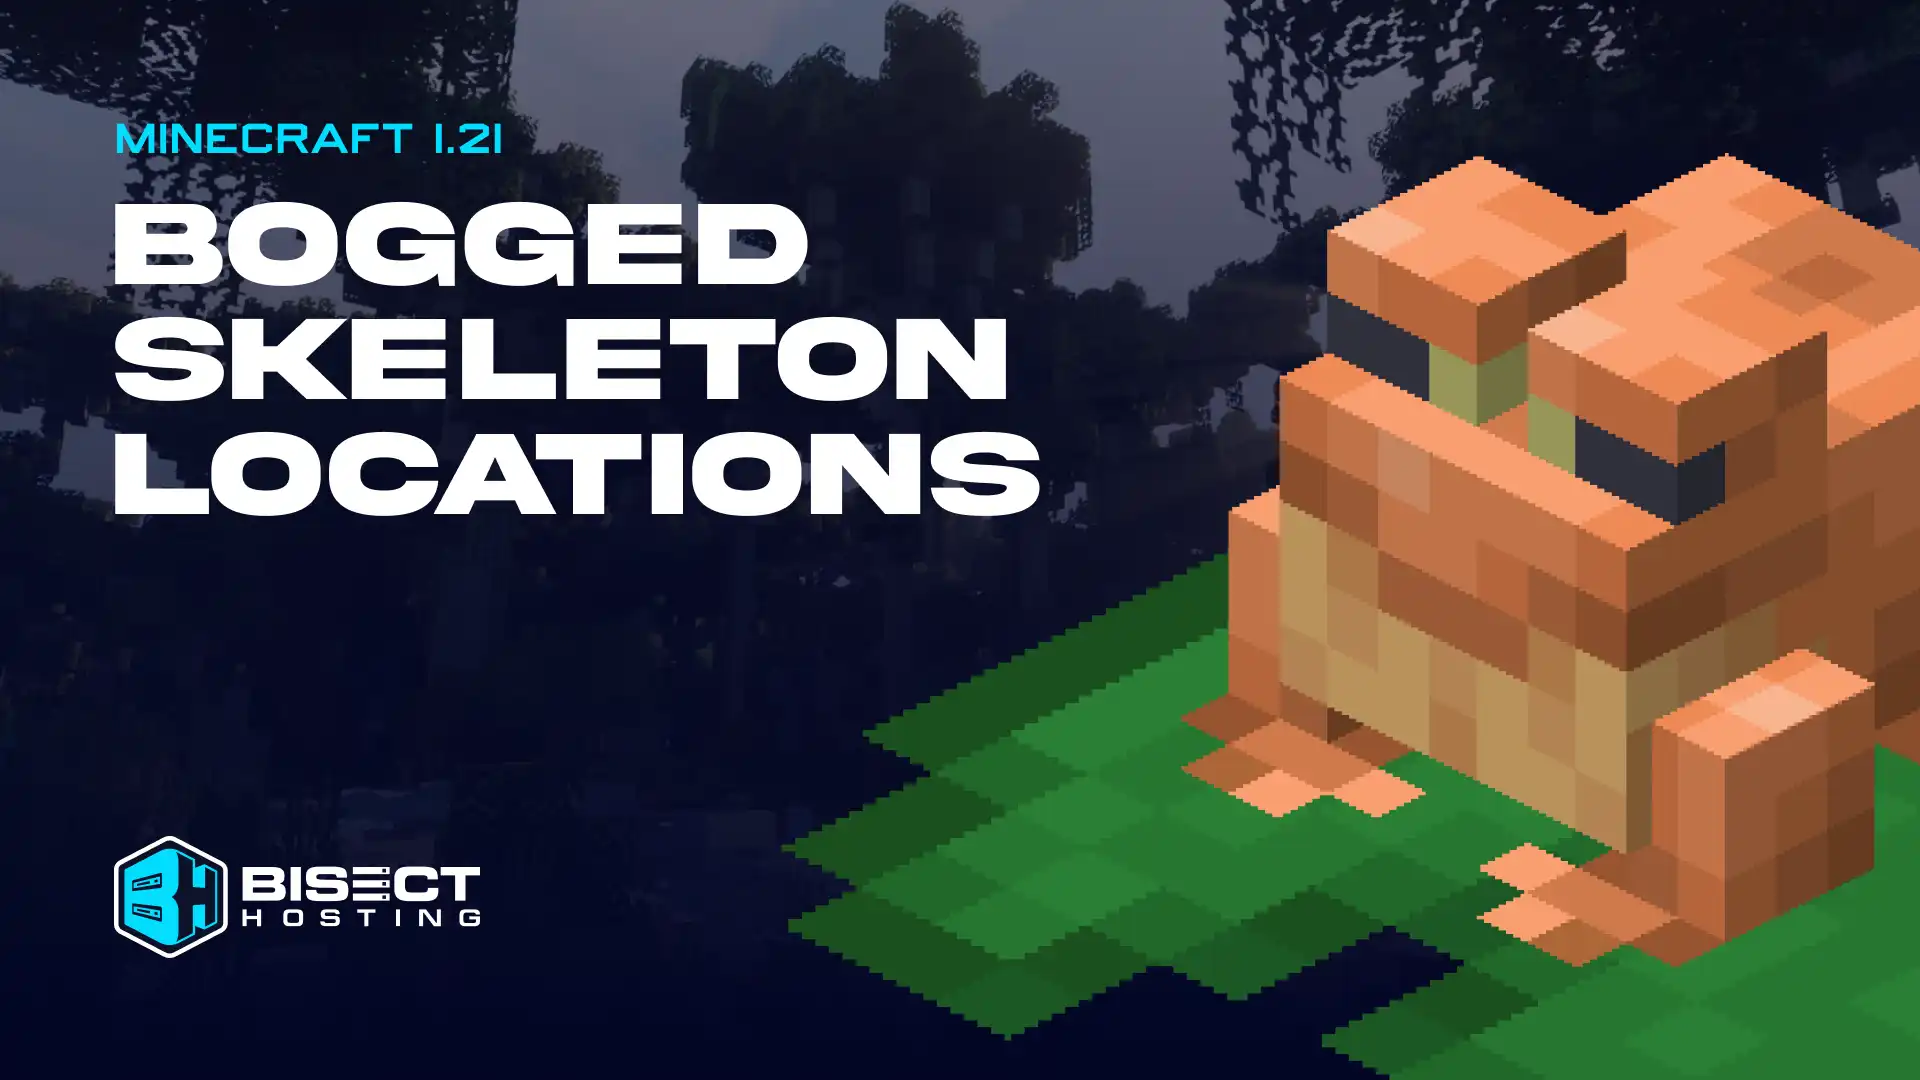 Where Do Bogged Skeletons Spawn in Minecraft 1.21?